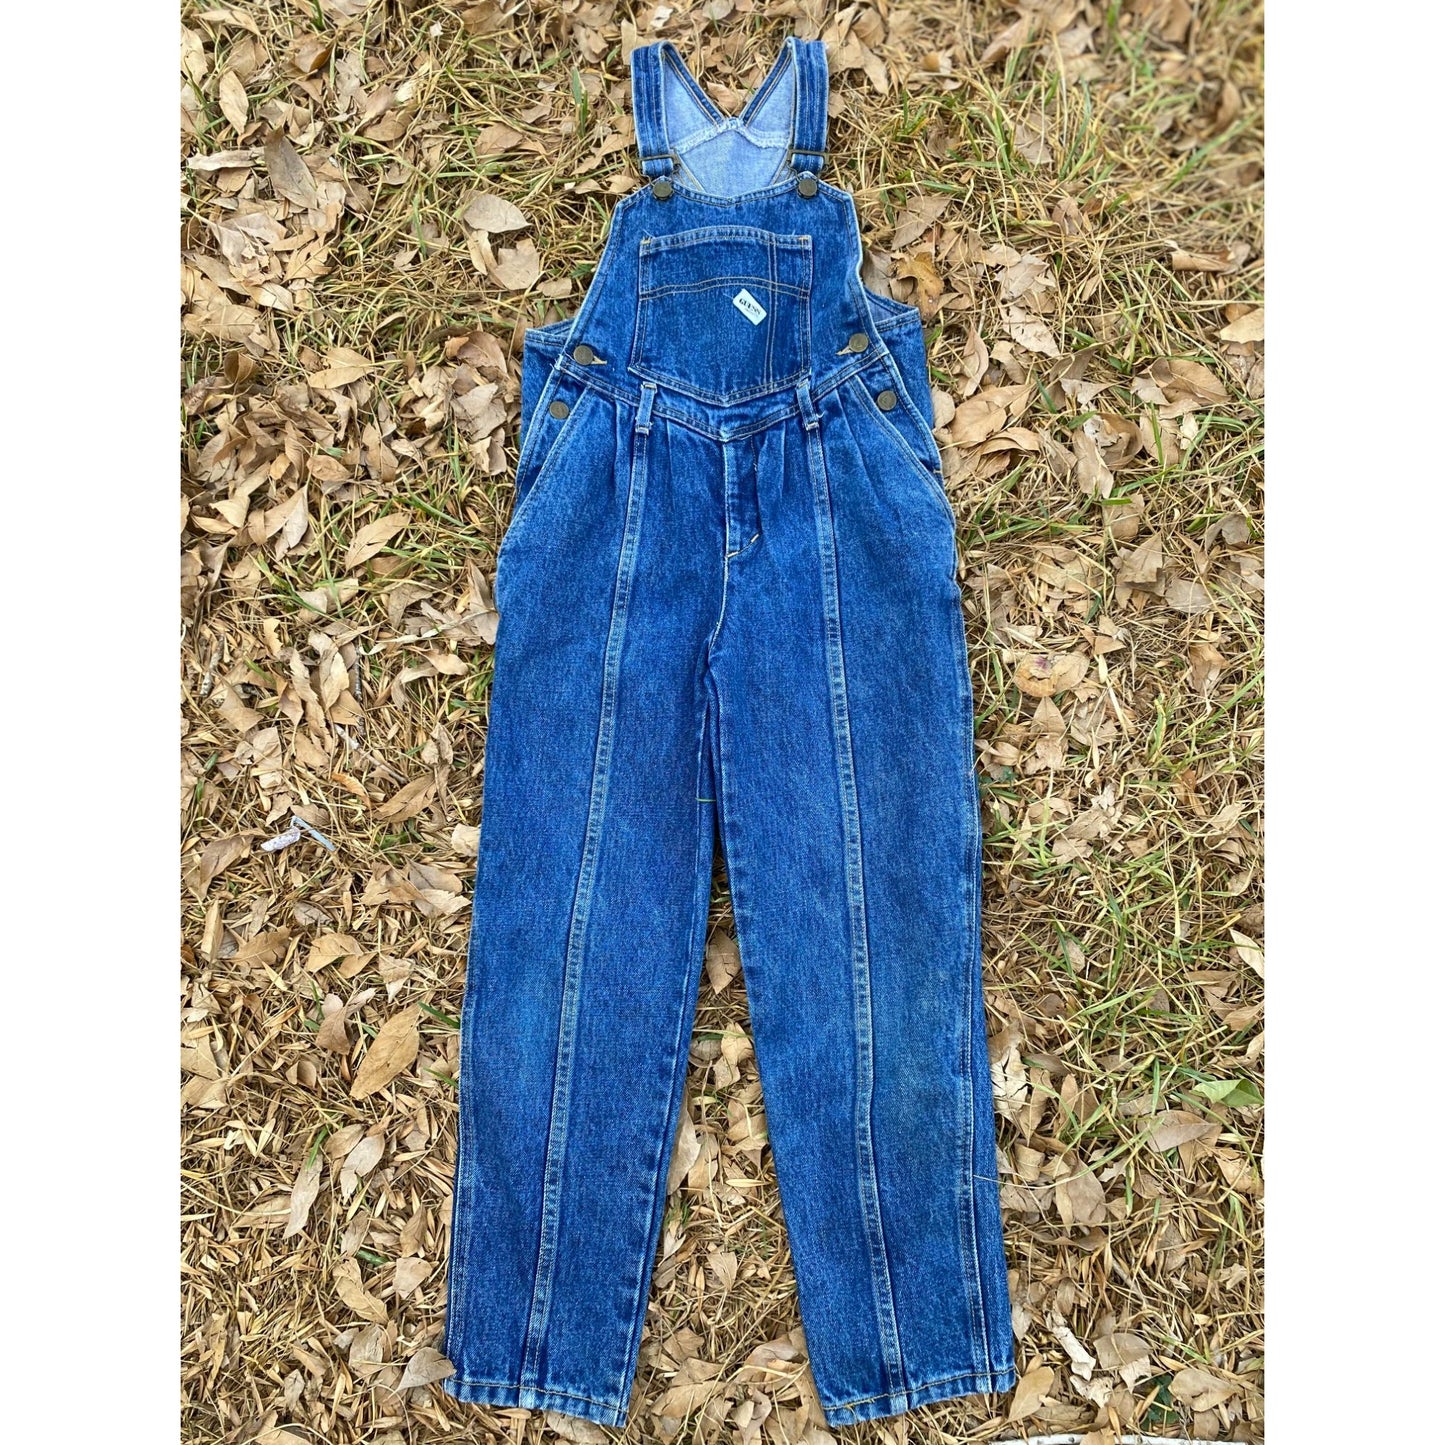 80/90's Guess Girls Denim Jean Overalls Size 10